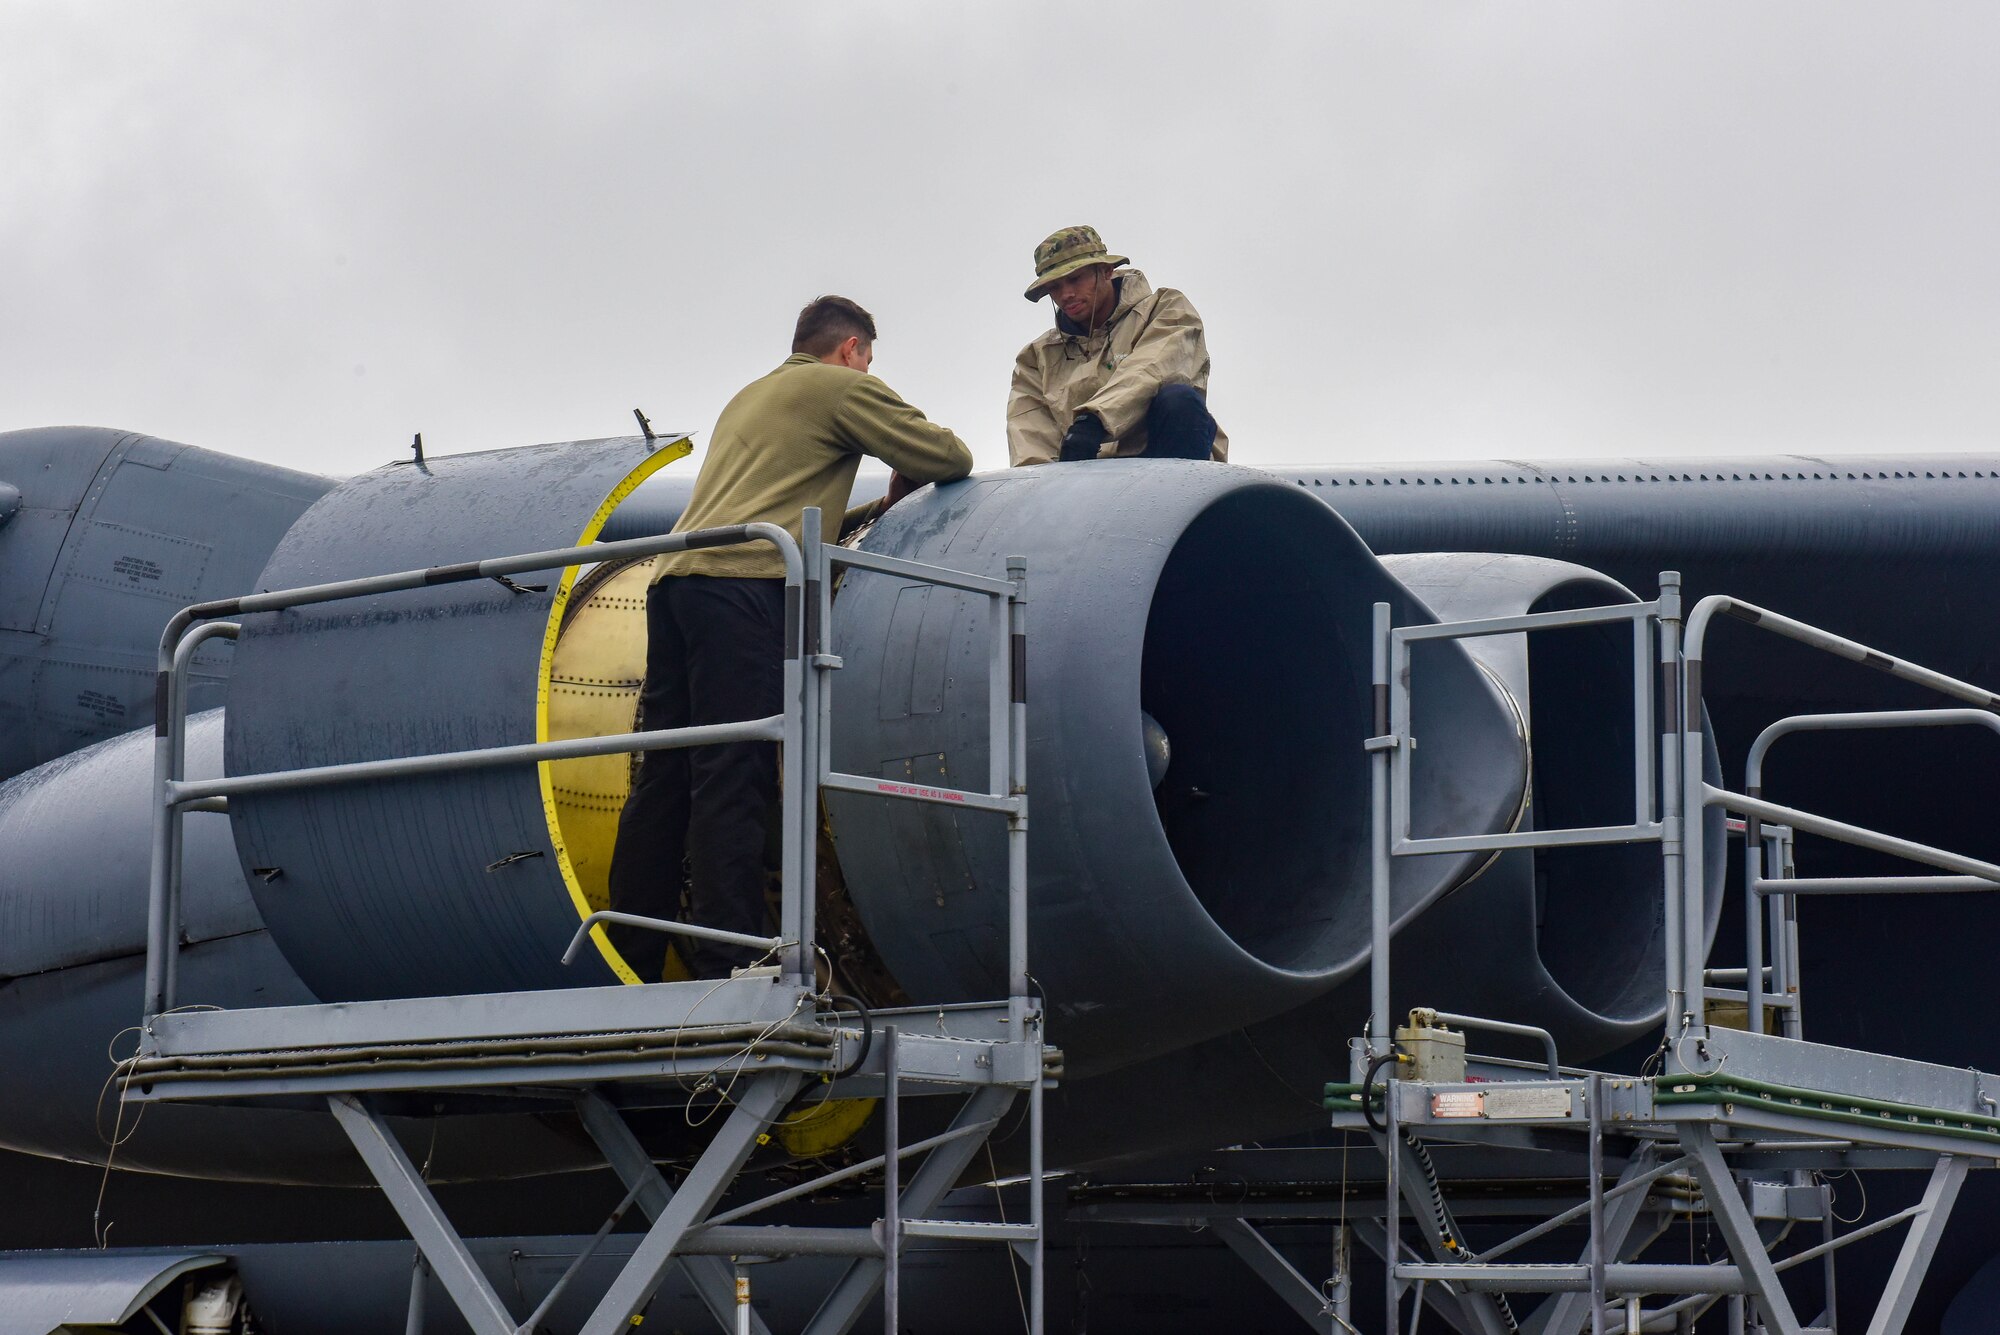 Senior Airman Bryan Caldera and Airman 1st Class Alex Cardenas, 69th Aircraft Maintenance Unit technicians, perform maintenance on a B-52H Stratofortress engine at Joint Base Elmendorf-Richardson, Alaska, July 17, 2023.  The Airmen from the 69th AMU were sent to JBER in support of a bomber Agile Combat Employment exercise. (U.S. Air Force photo by Senior Airman Zachary Wright)